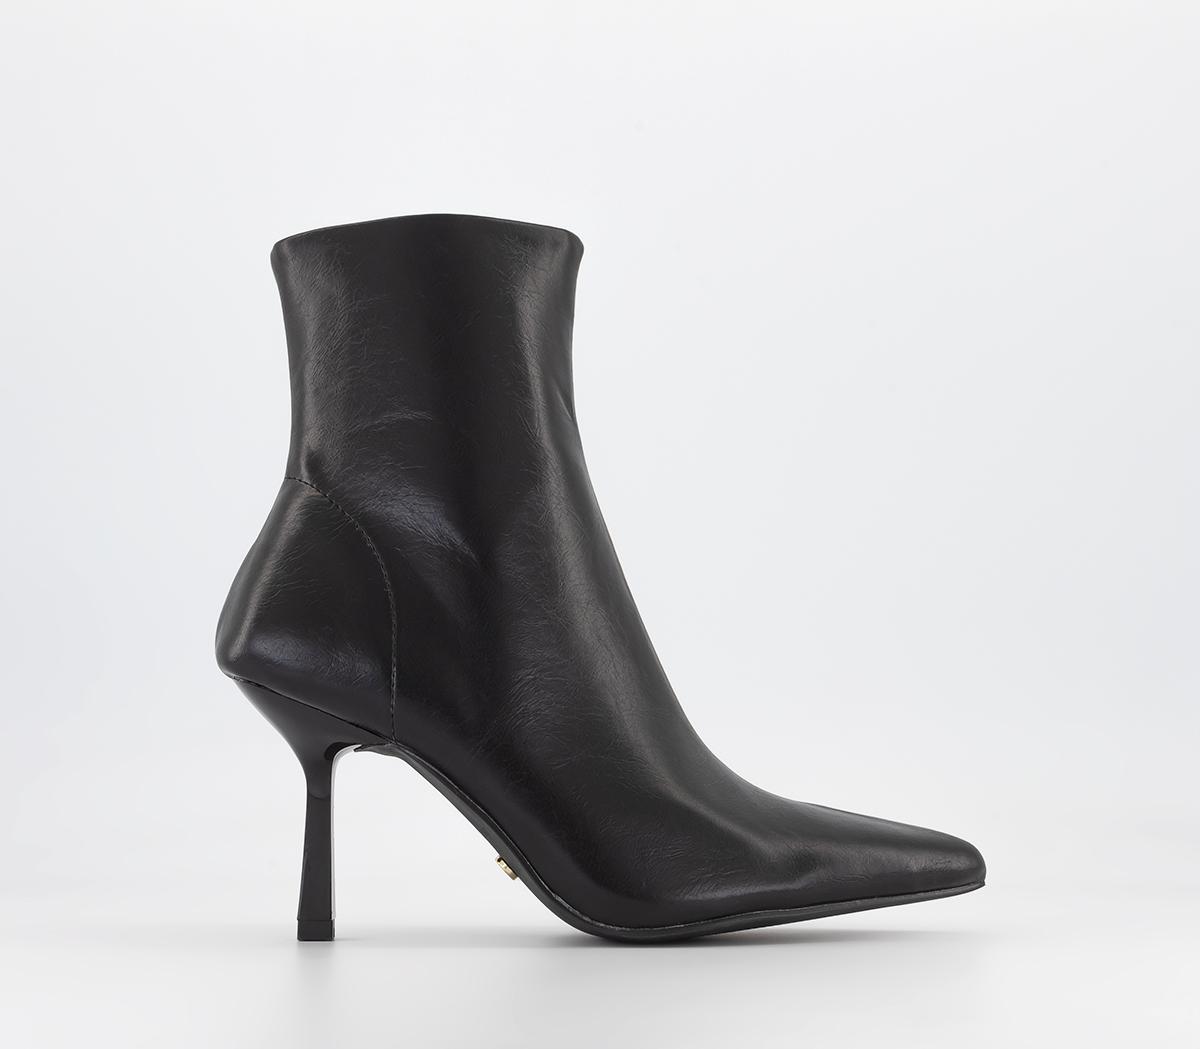 OFFICEAll Set Point Toe Ankle BootsBlack Leather